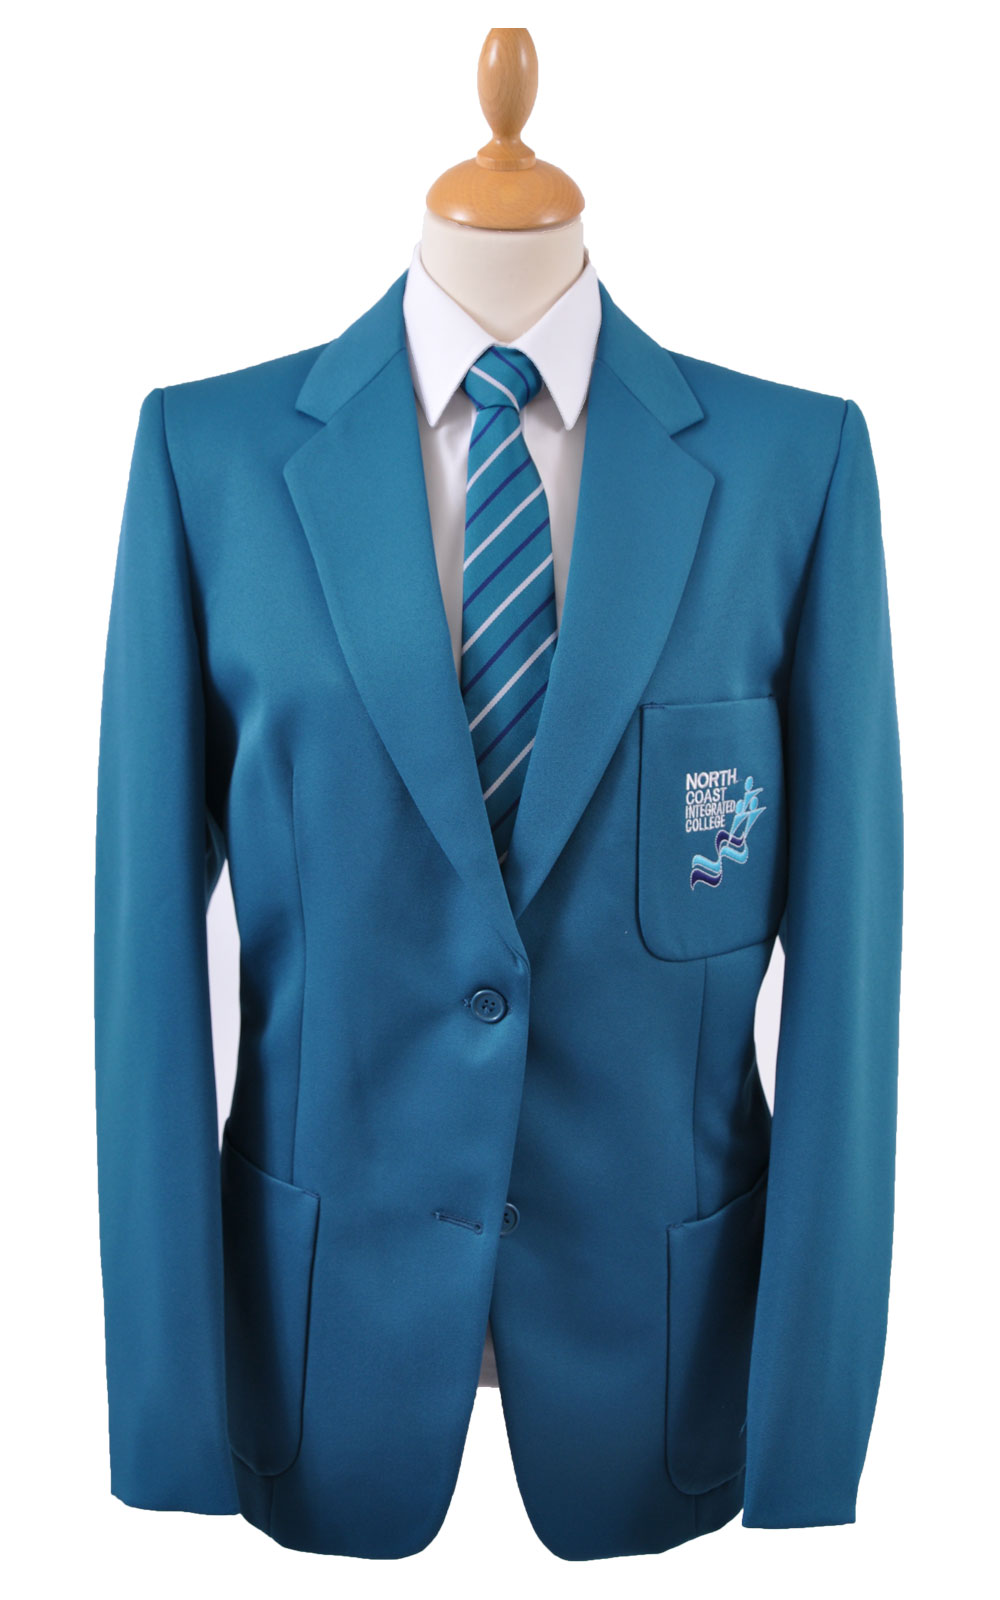 Picture of North Coast Integrated Girls Blazer - S&T